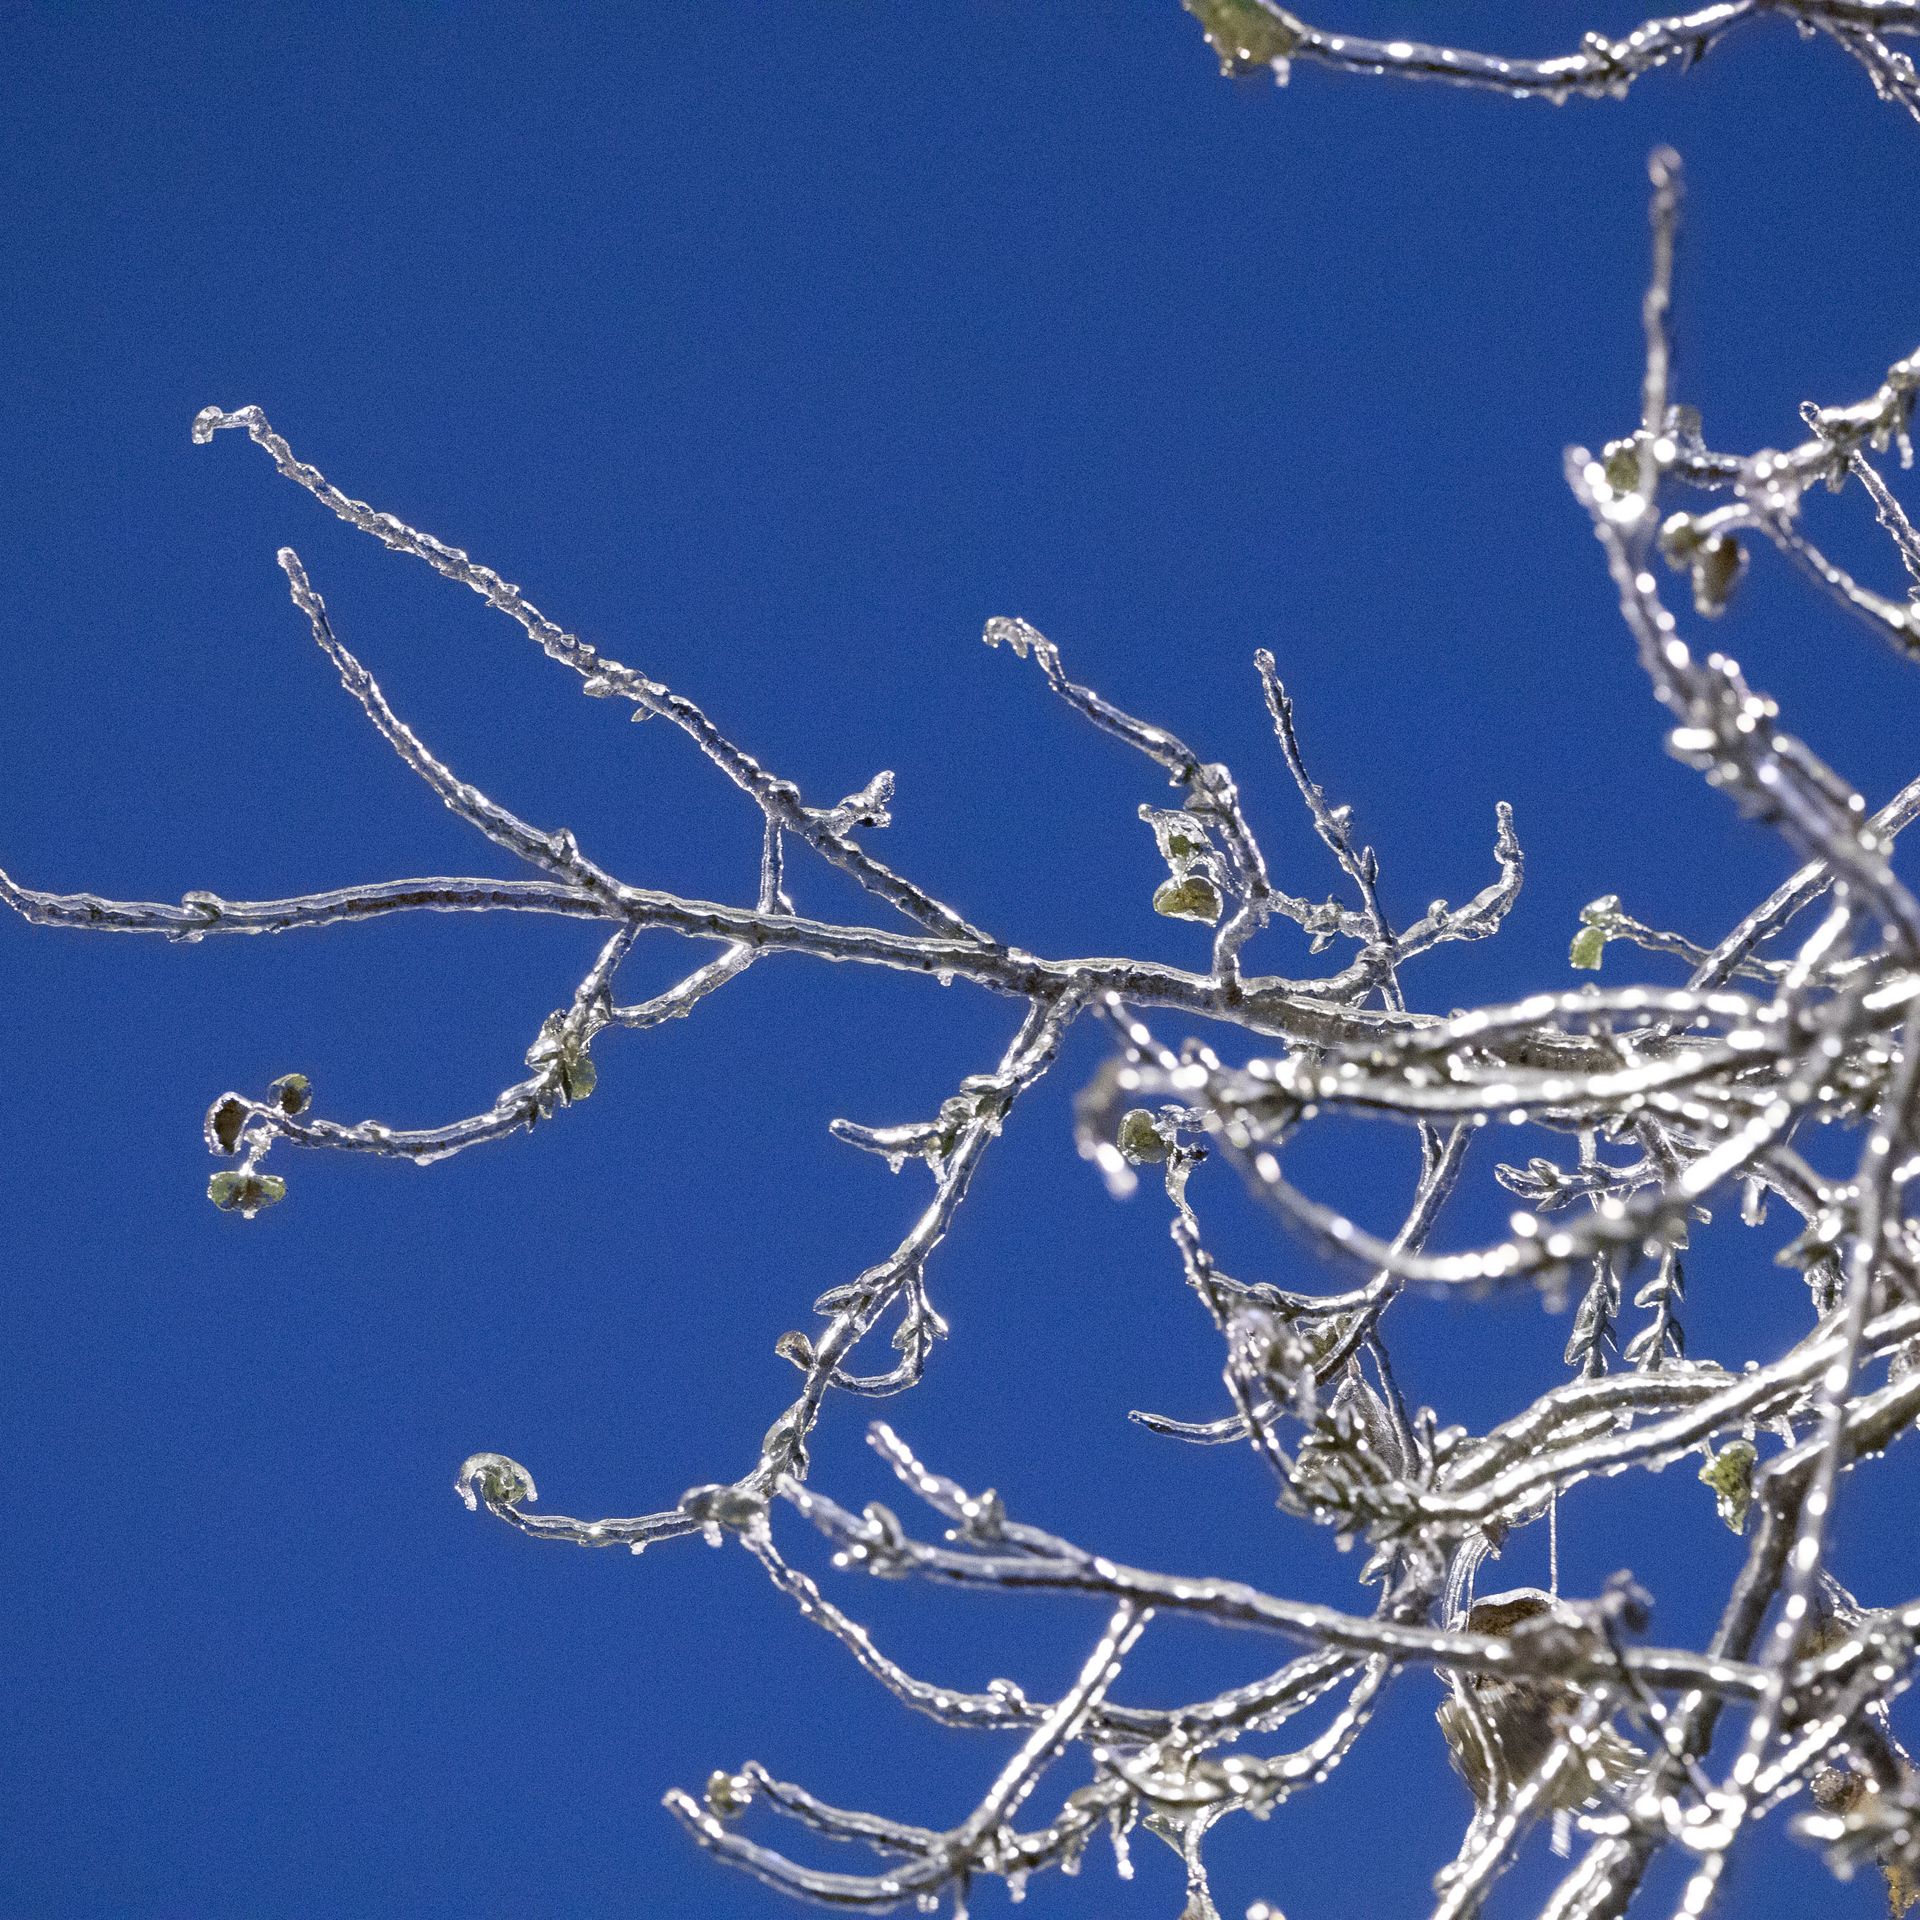 An iced over branch hangs in the air.